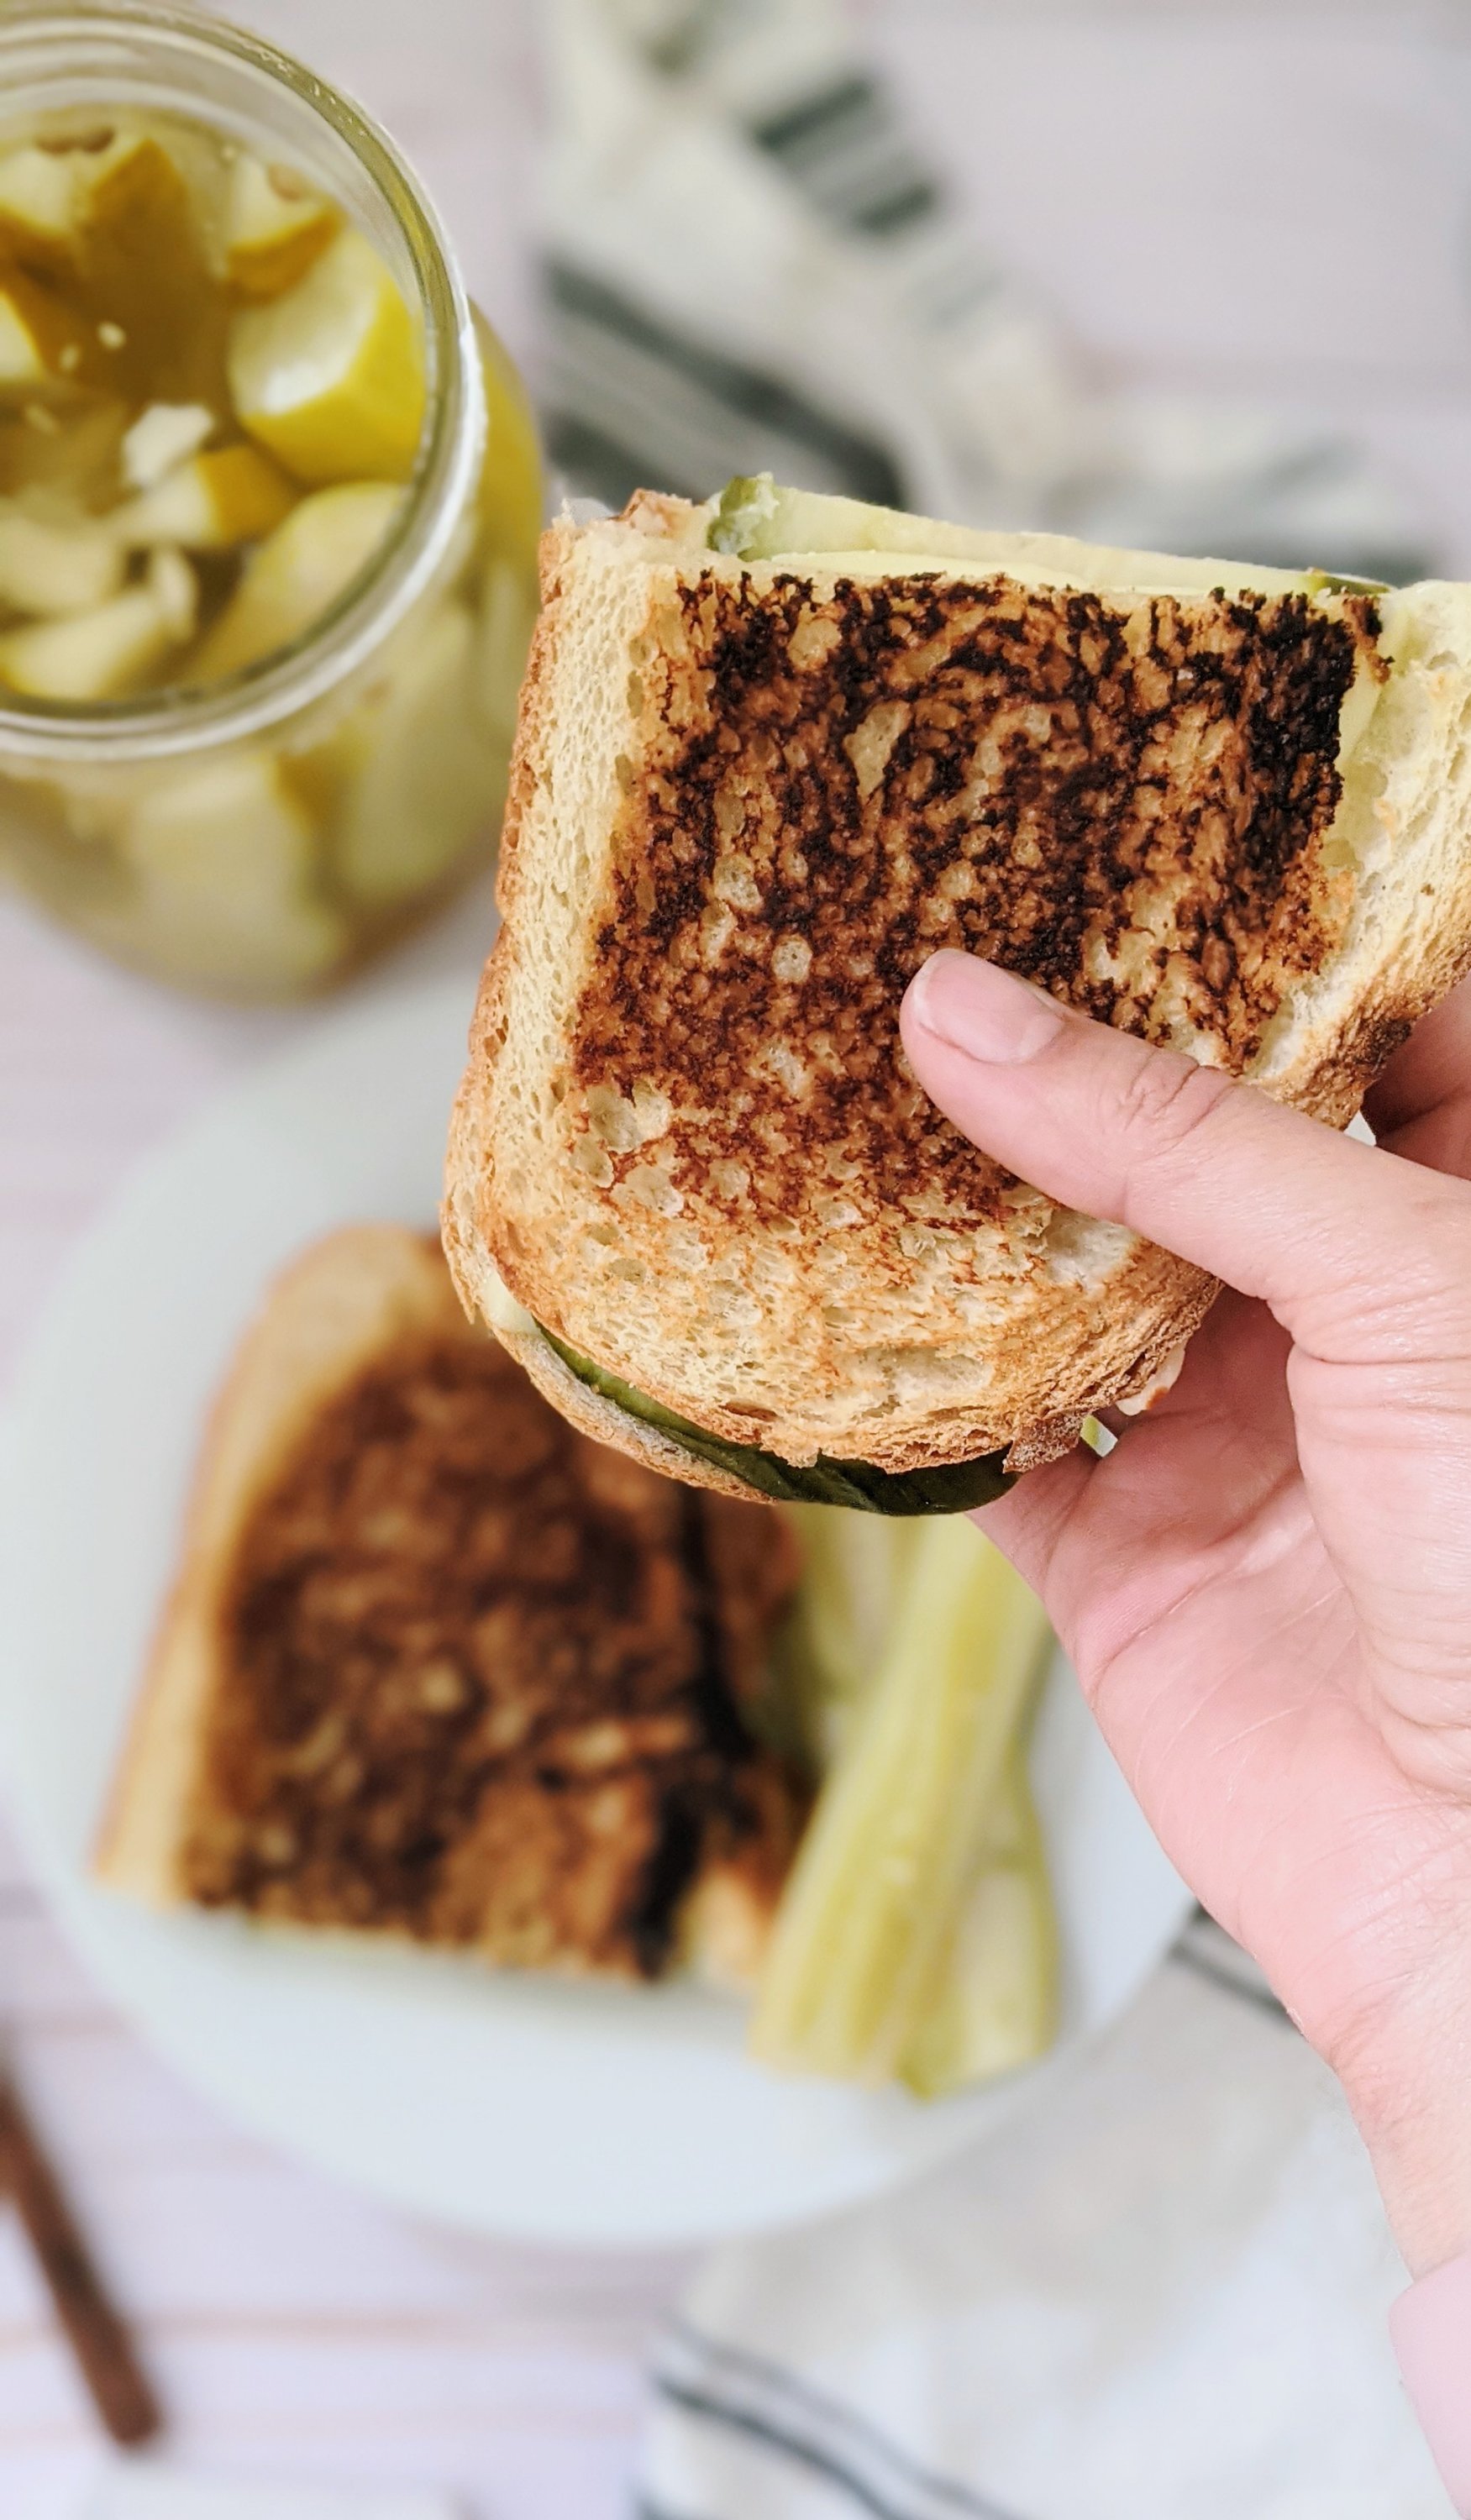 meatless pickle grilled cheese recipe with pickles in the sandwich vegetarian grilled cheese fun recipes for pickle lovers